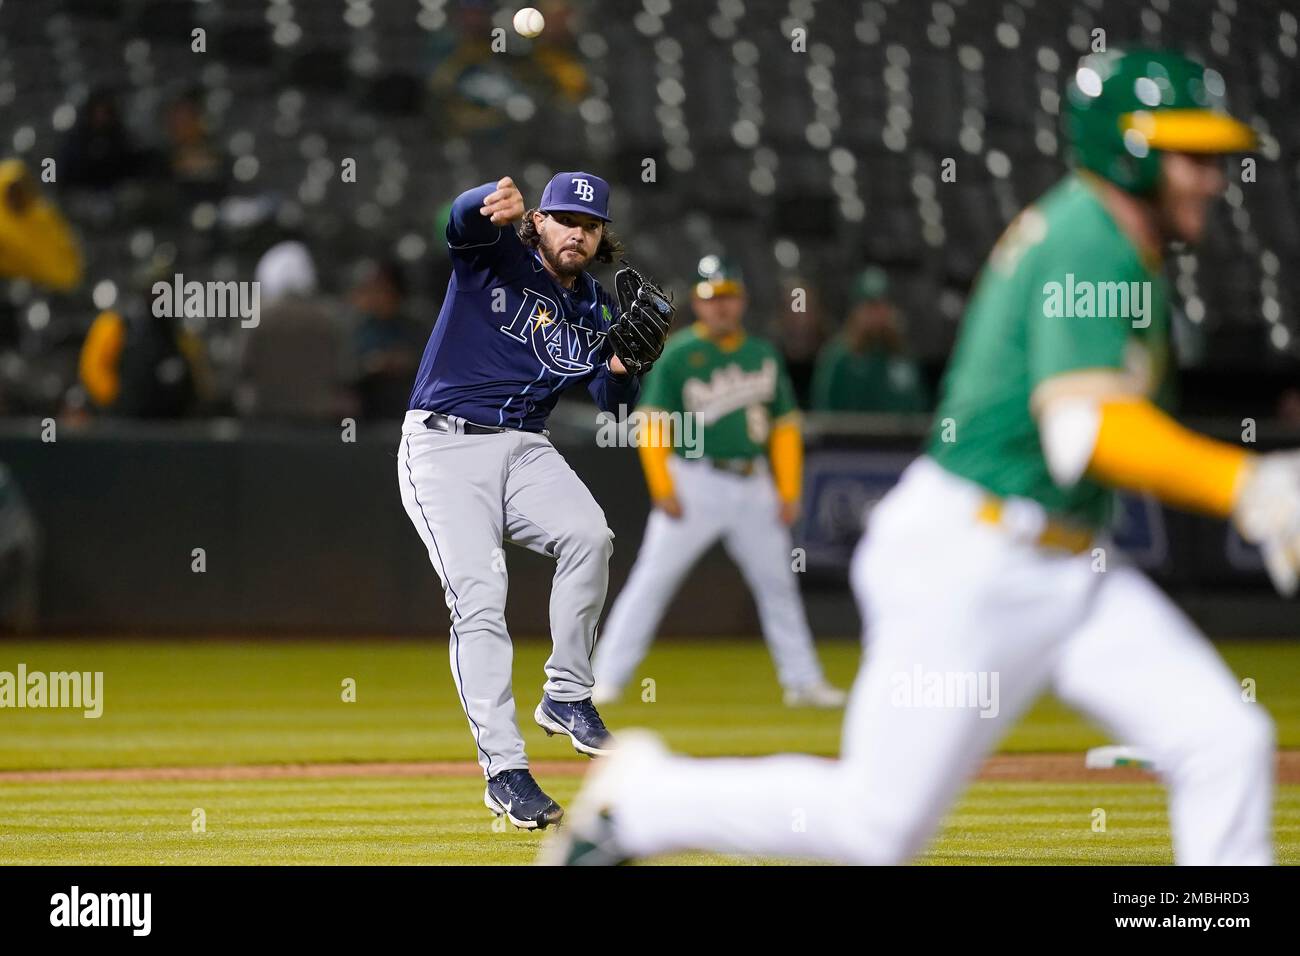 Tampa Bay Rays pitcher Phoenix Sanders, left, throws to first base